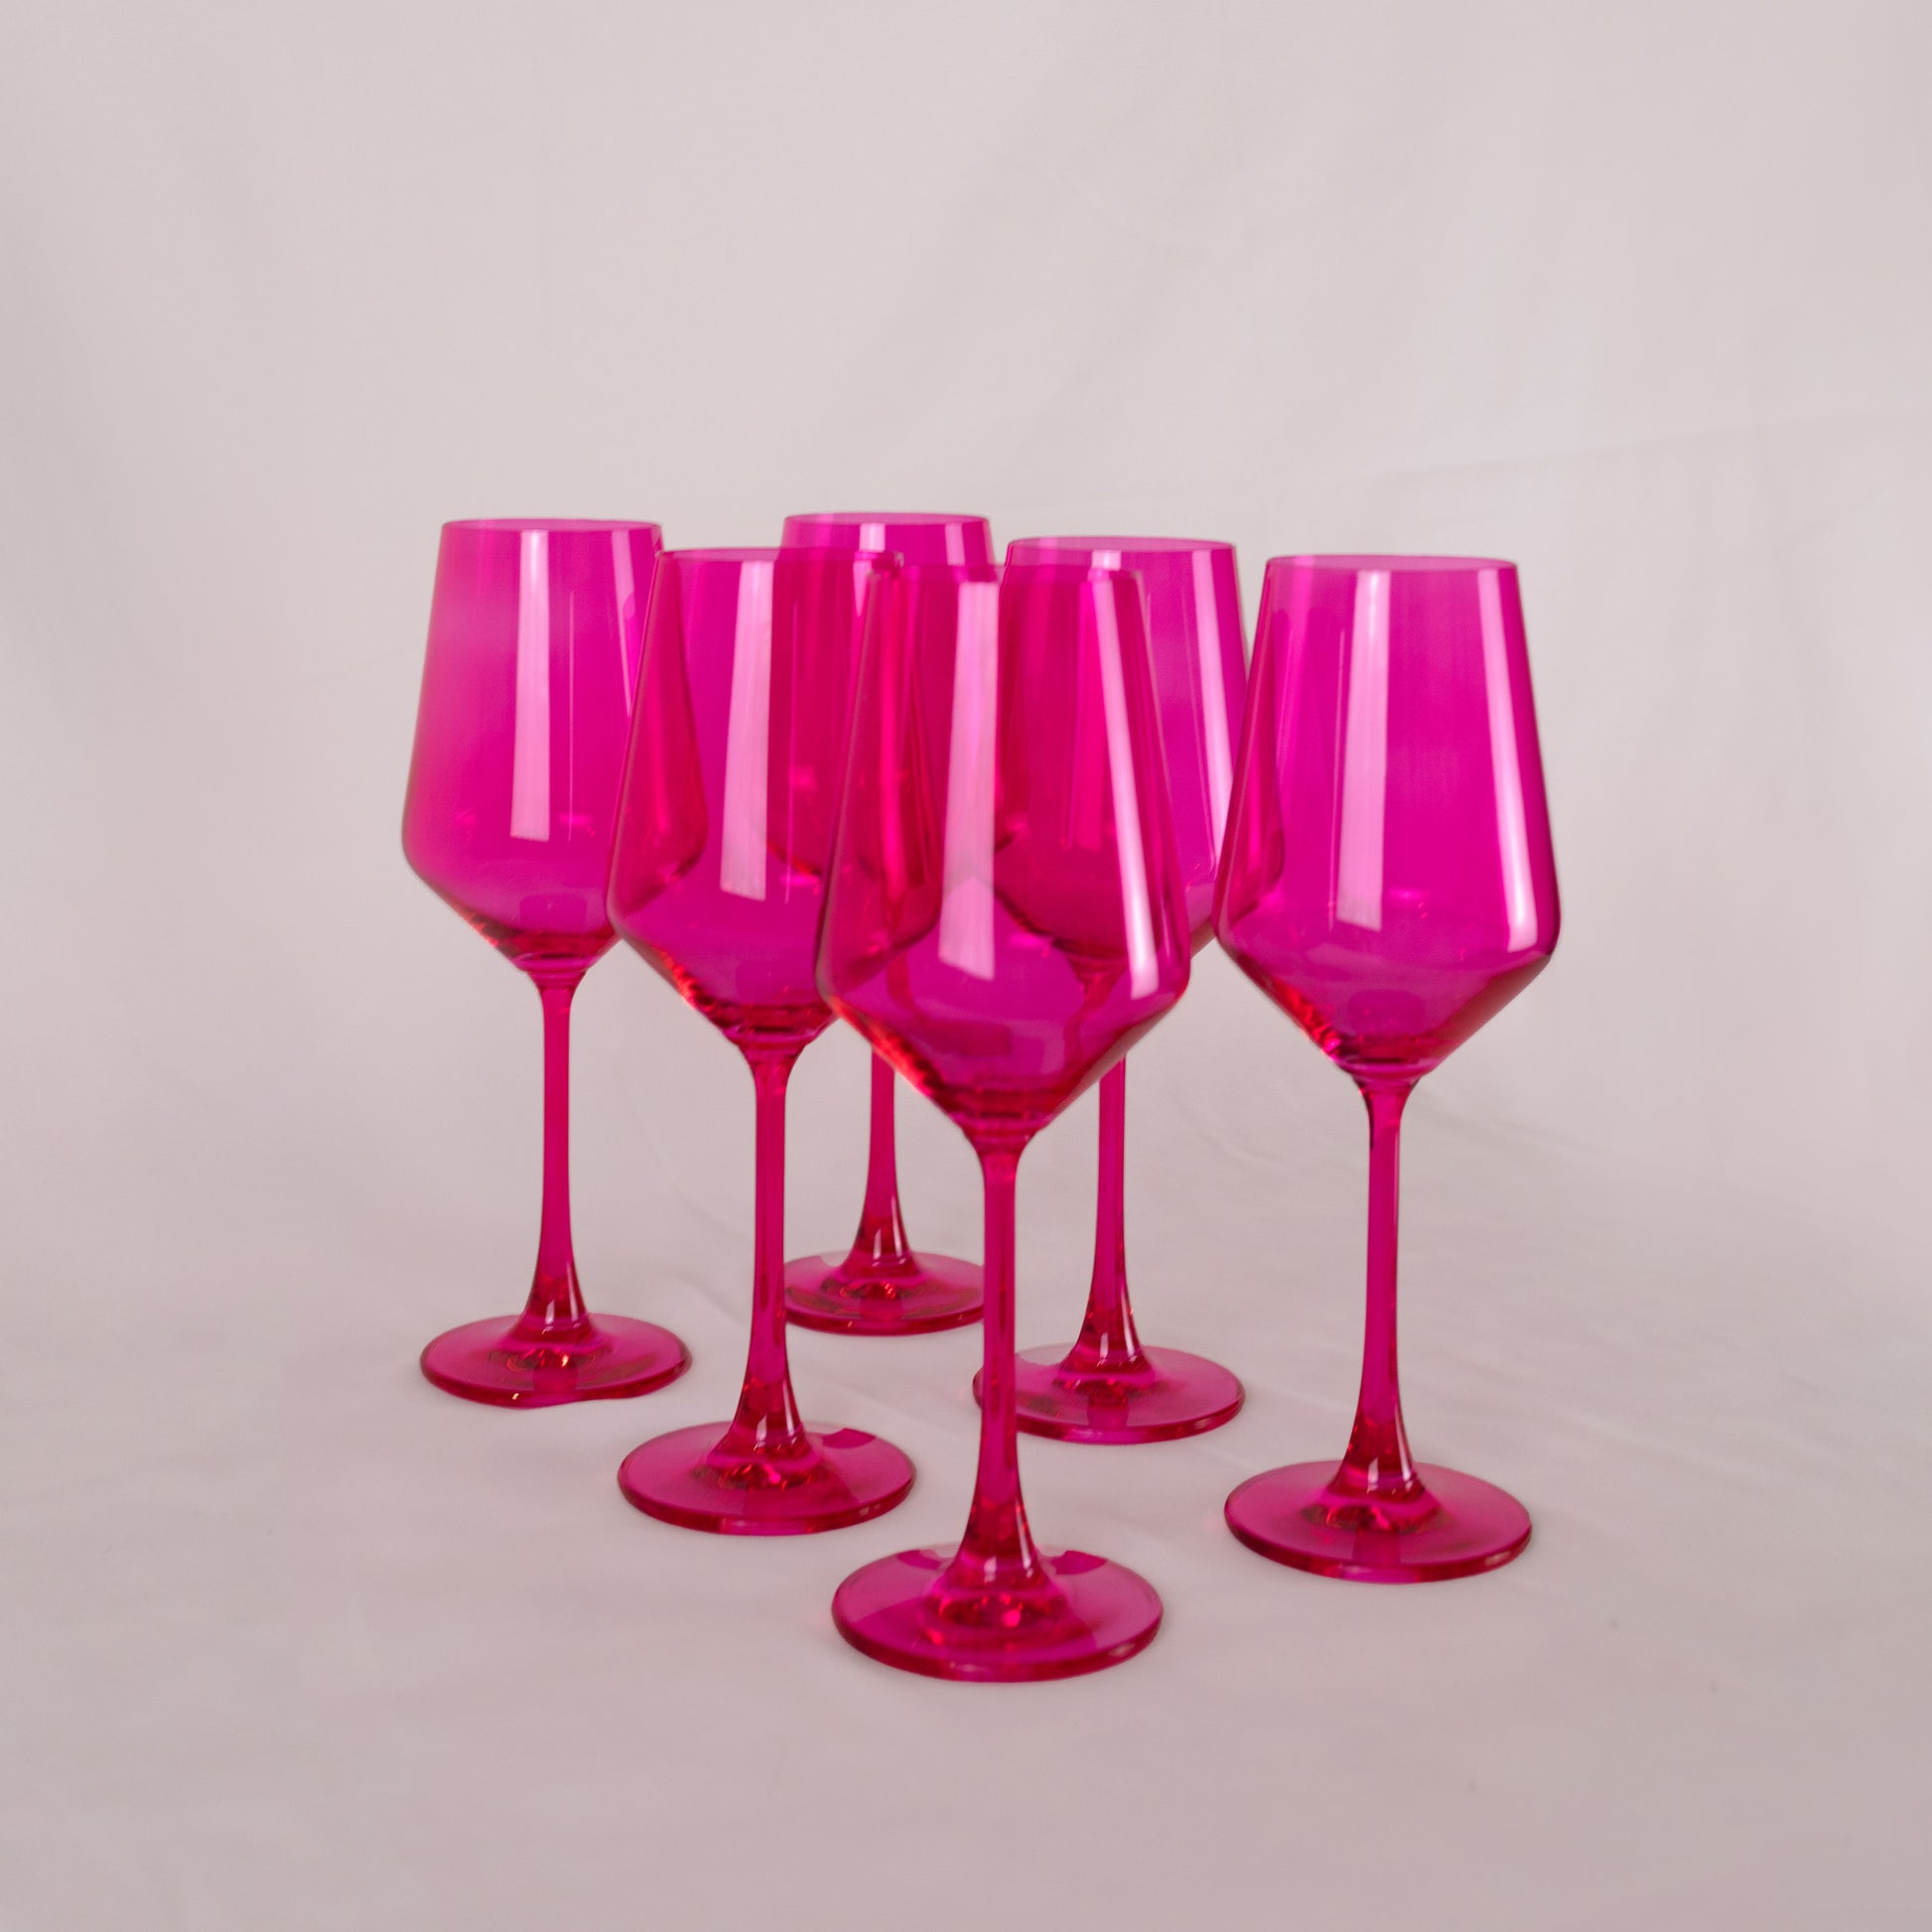 Bold and vibrant pink wine glasses - set of 6